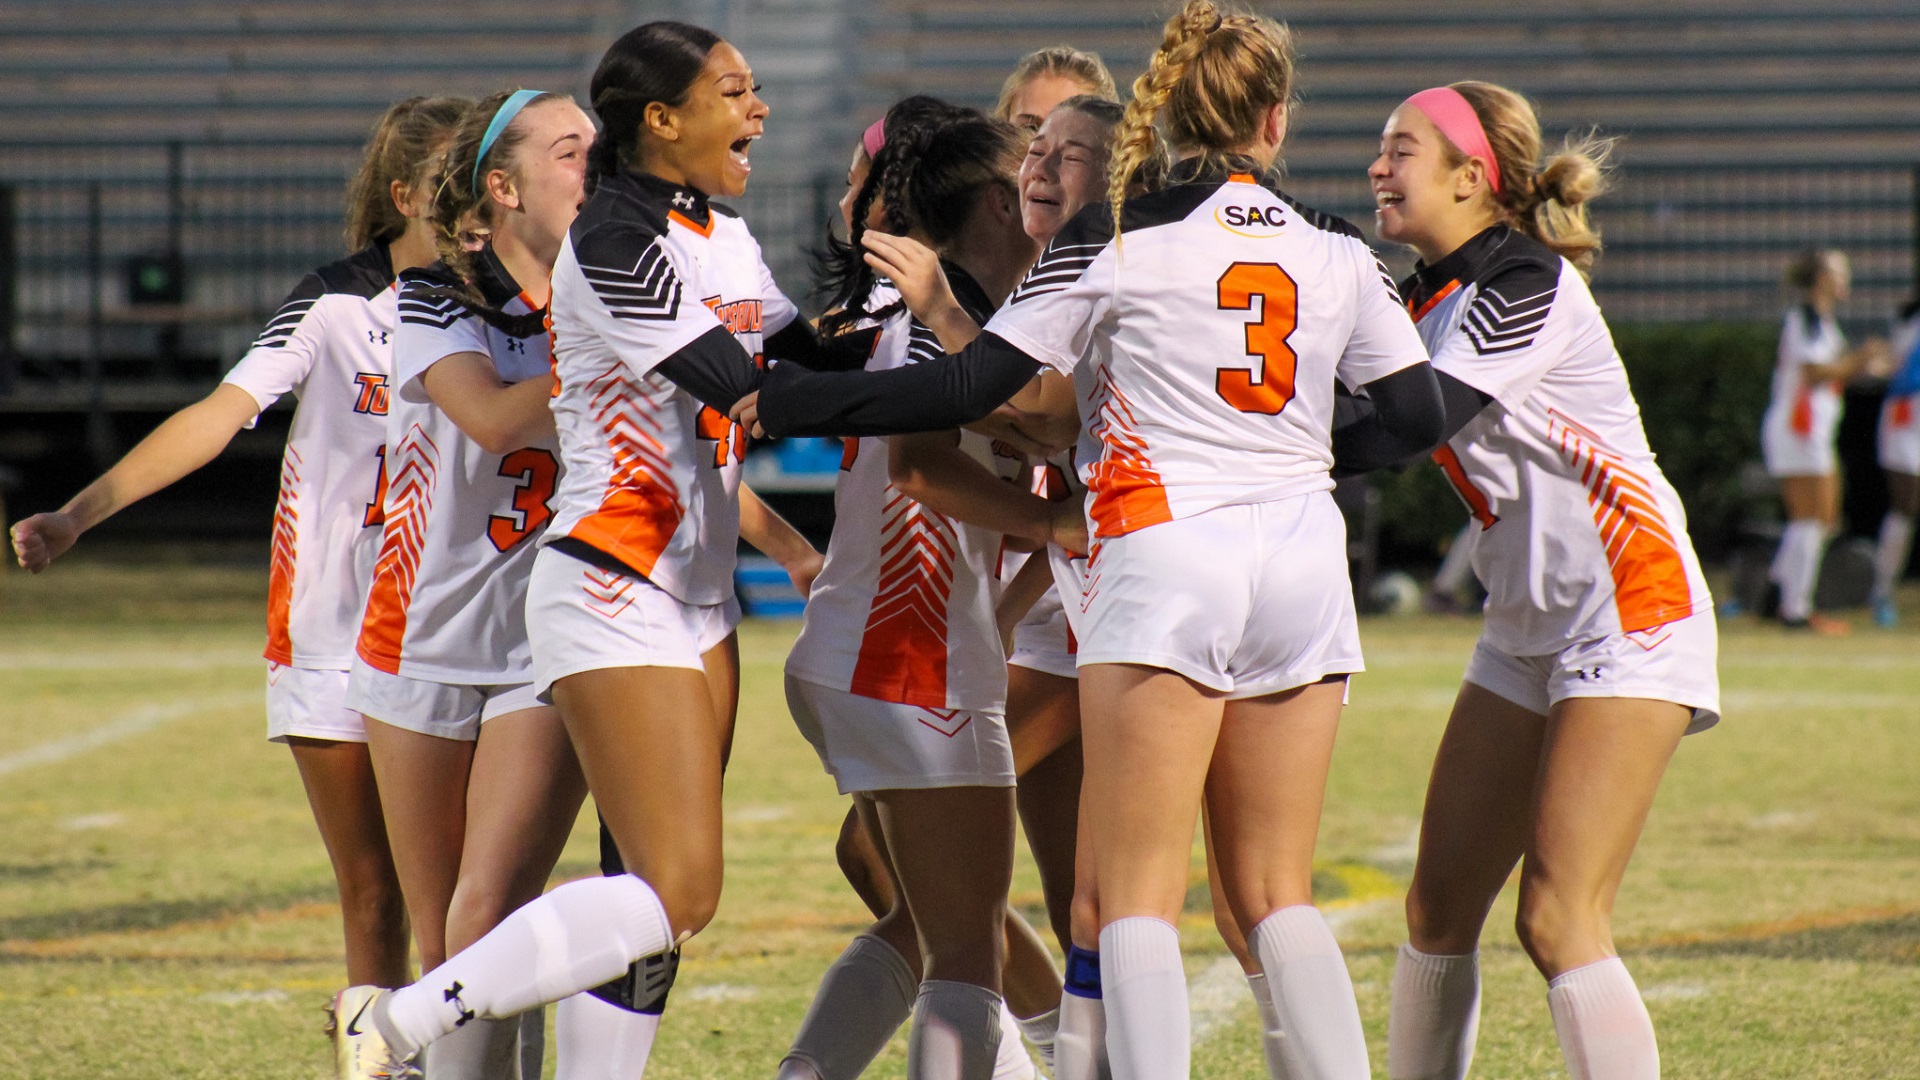 Chayse Stonebraker is surrounded by her teammates after scoring the tying goal (photo by student photographer Kari Ham)